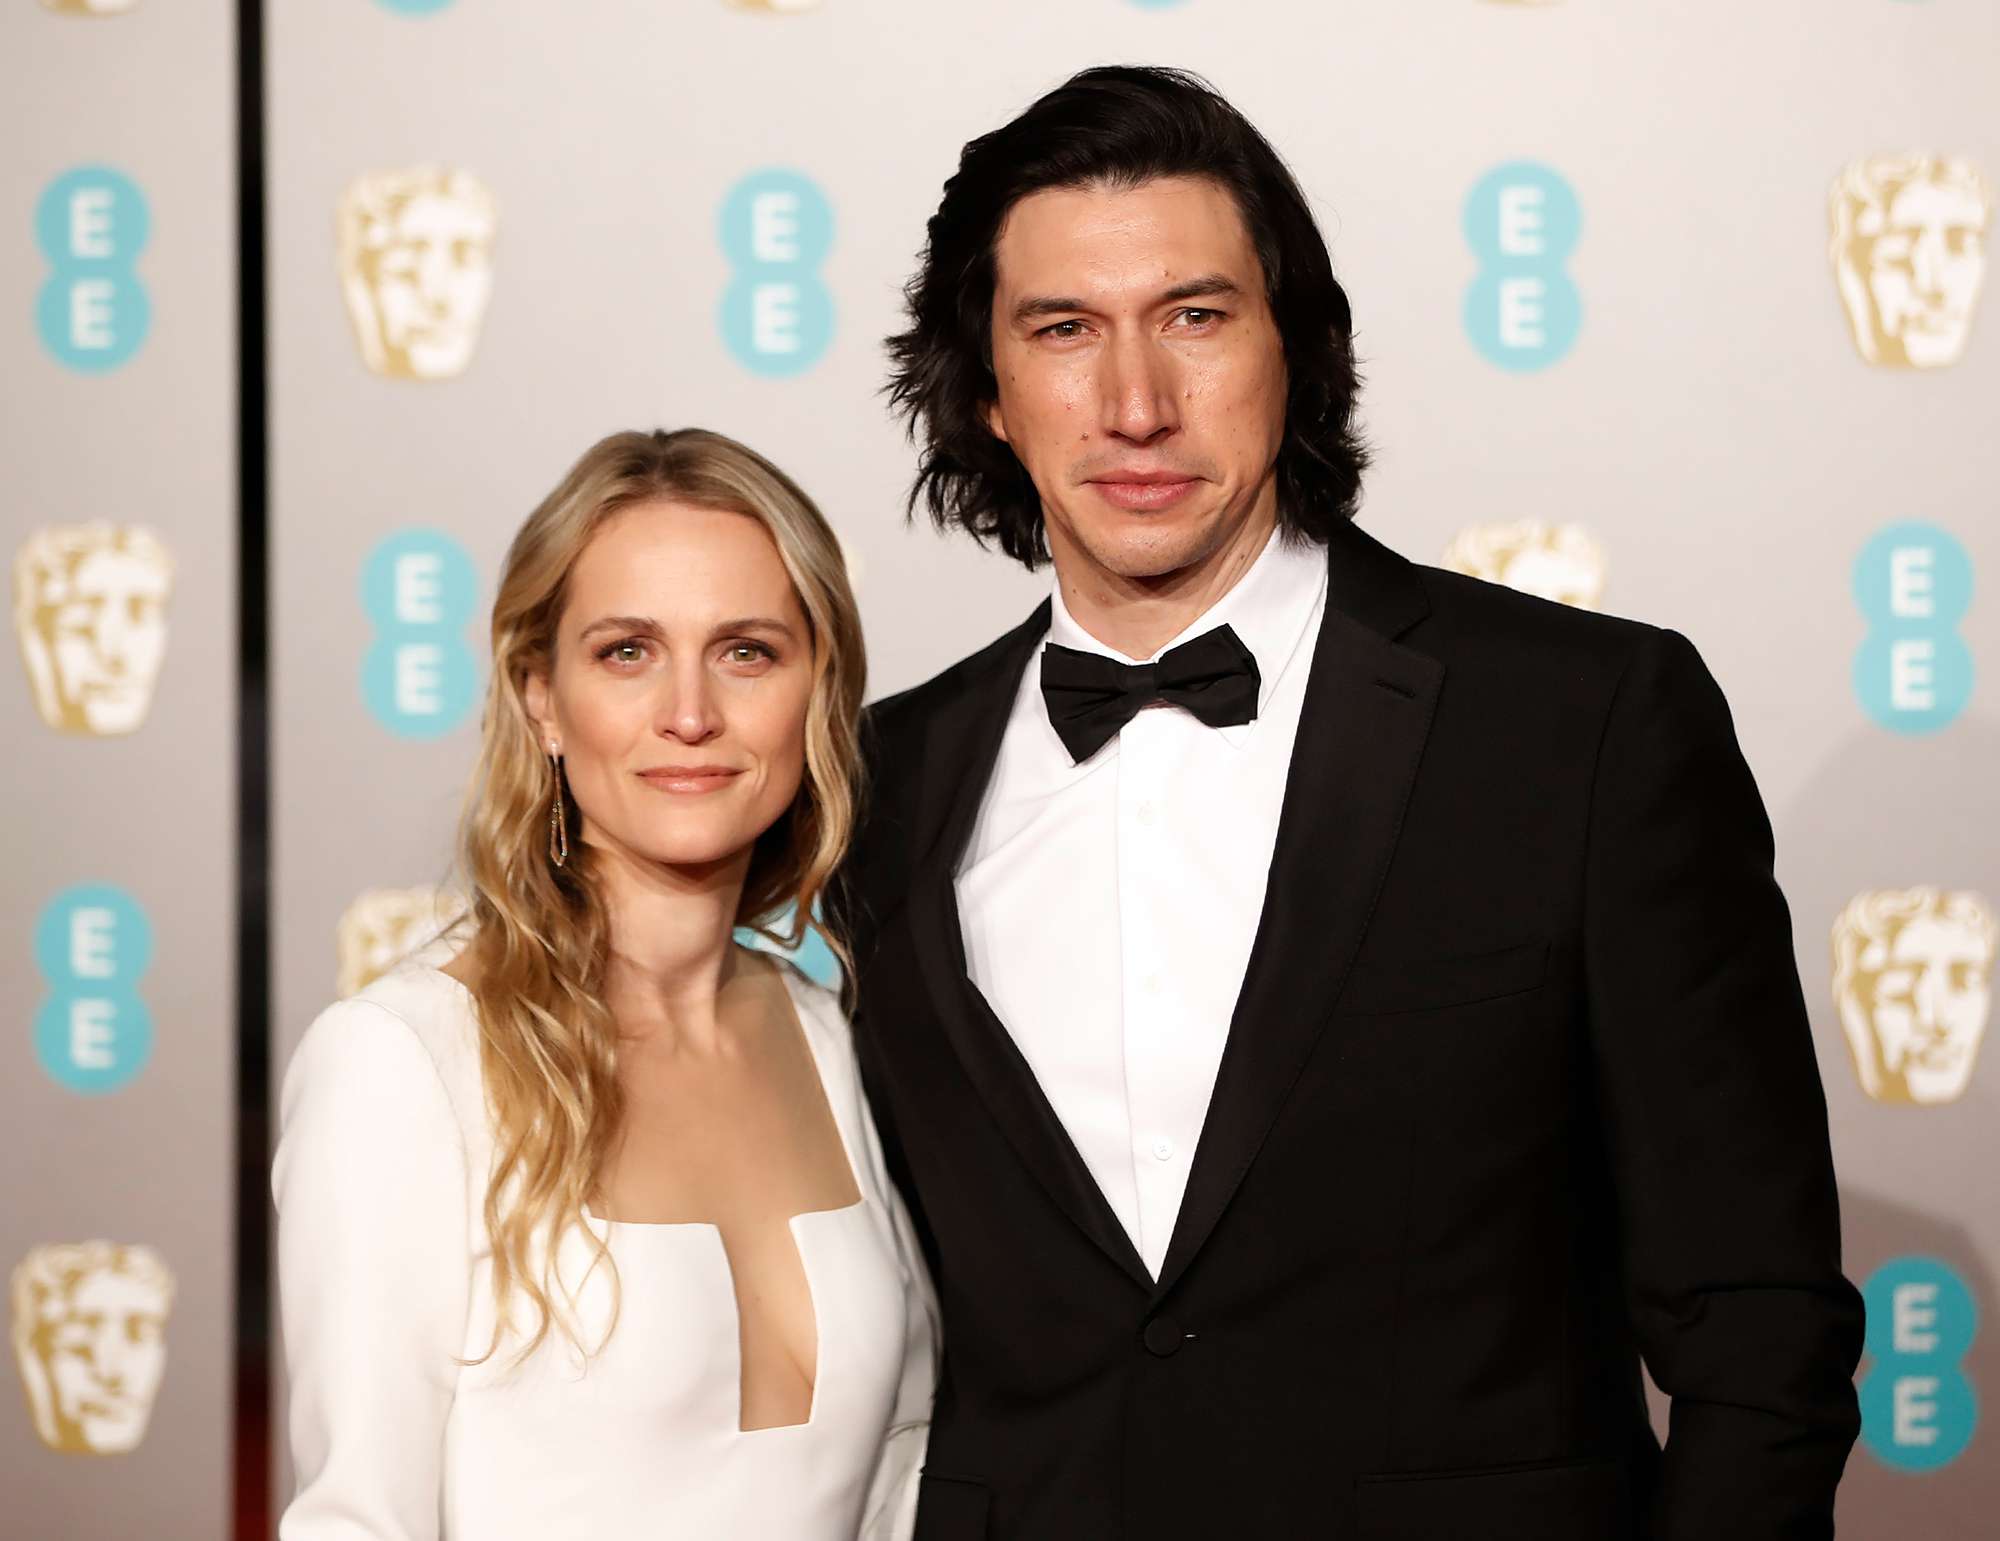 Joanne Tucker (L) and Adam Driver (R) pose on the red carpet upon arrival at the BAFTA British Academy Film Awards at the Royal Albert Hall in London on February 10, 2019